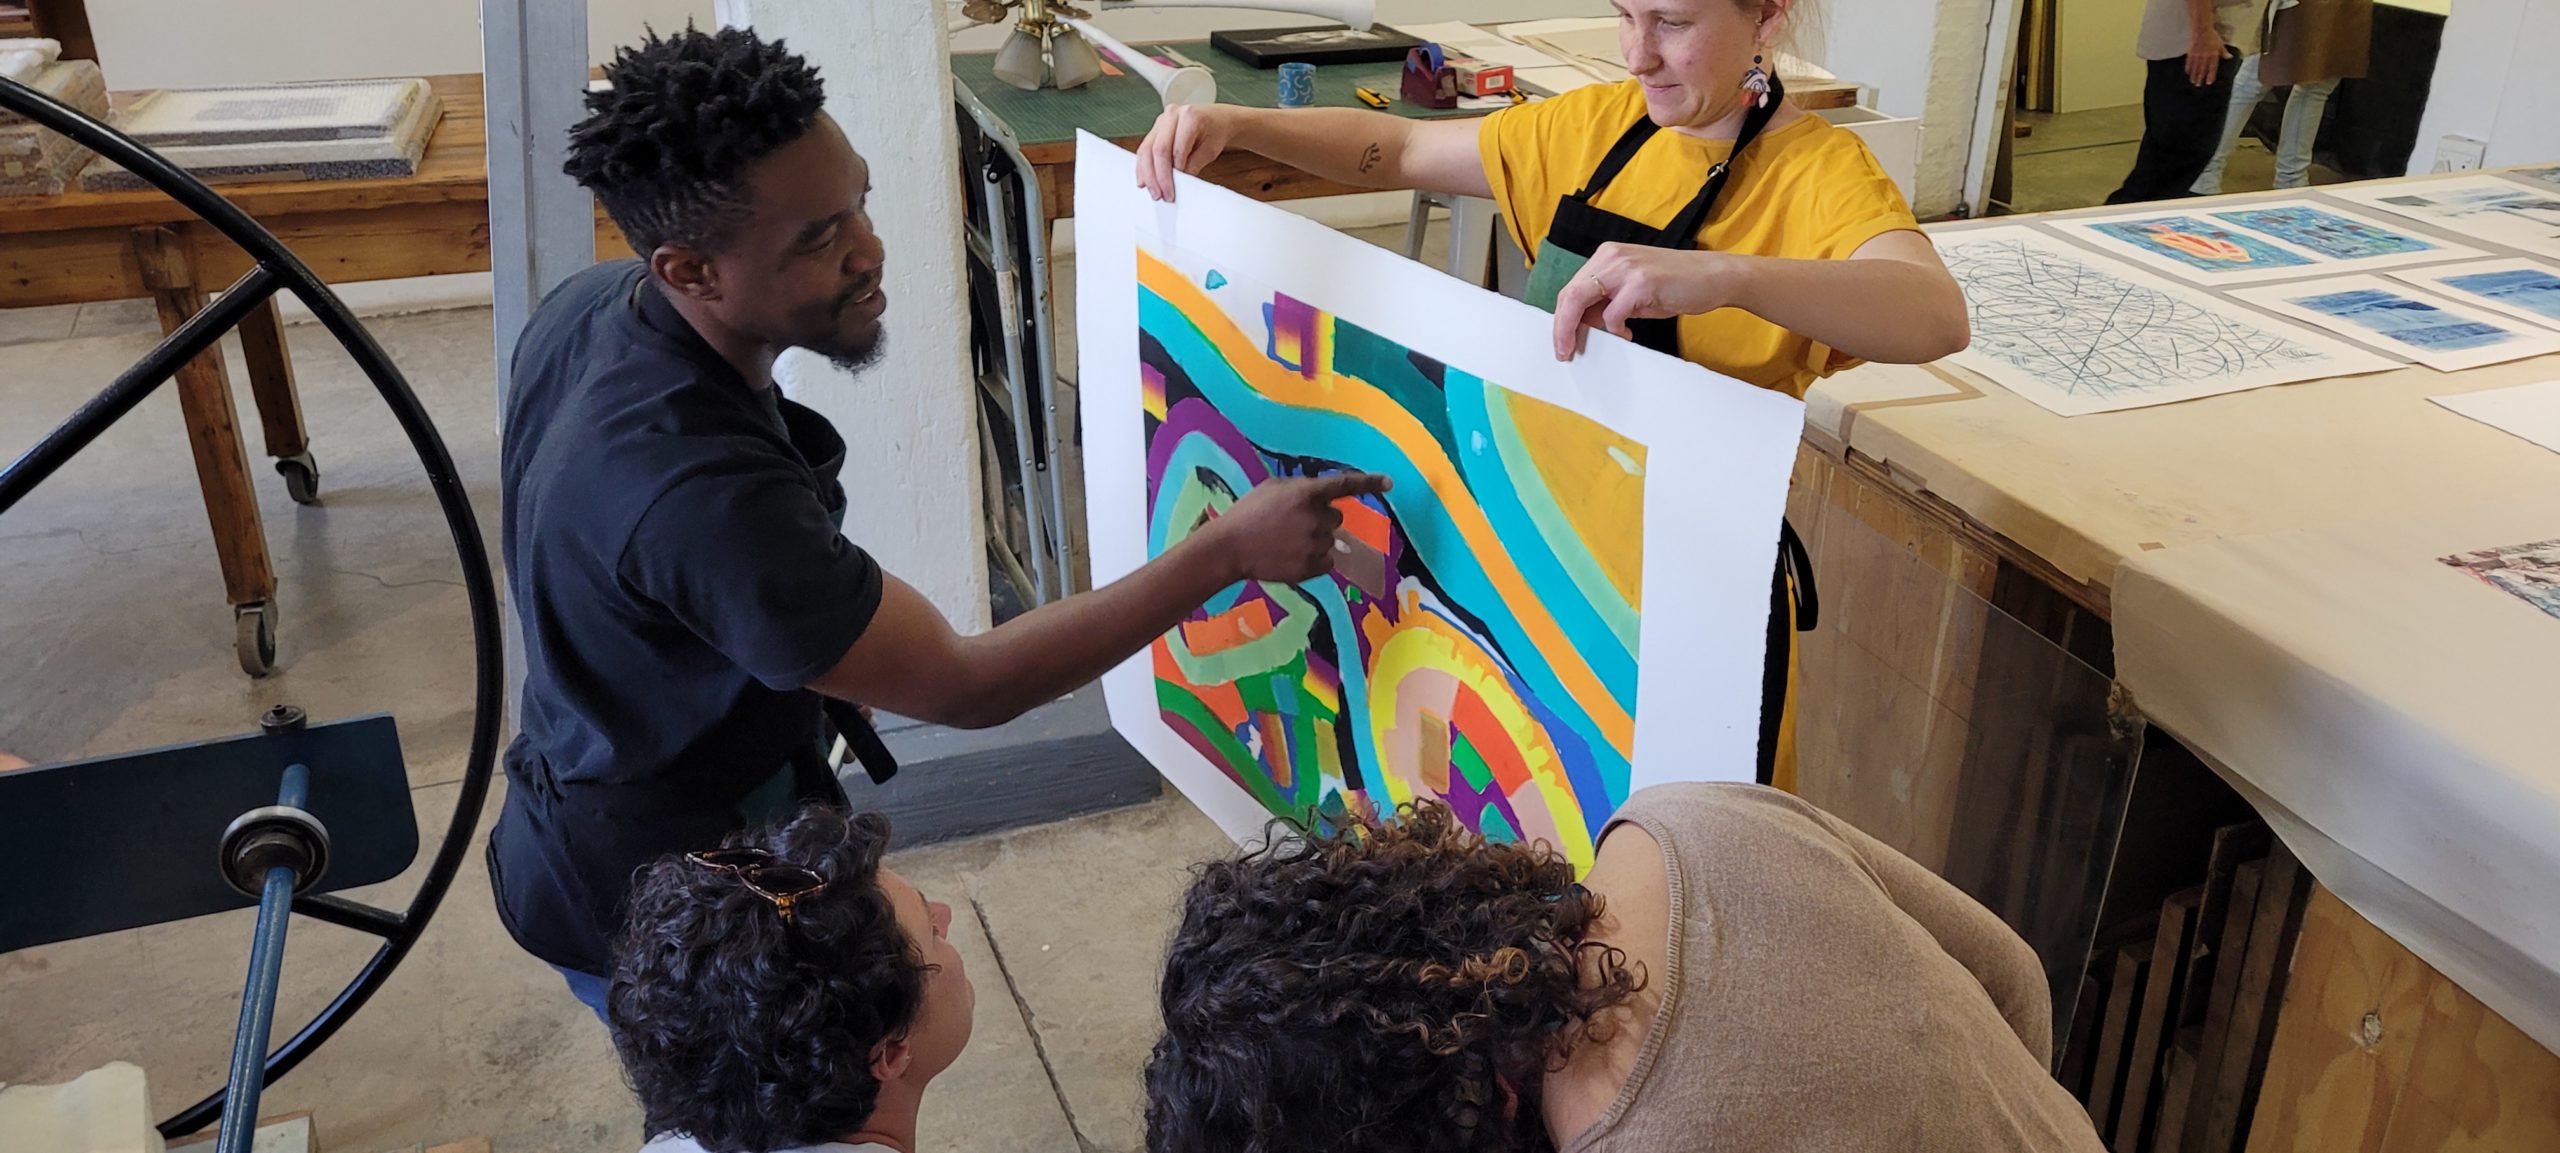 Khotso Motsoeneng (left) talking about his print just pulled from the press by Sarah Judge (right) with Anthea Buys (bottom left) and Kim-Lee Loggenberg (bottom right)